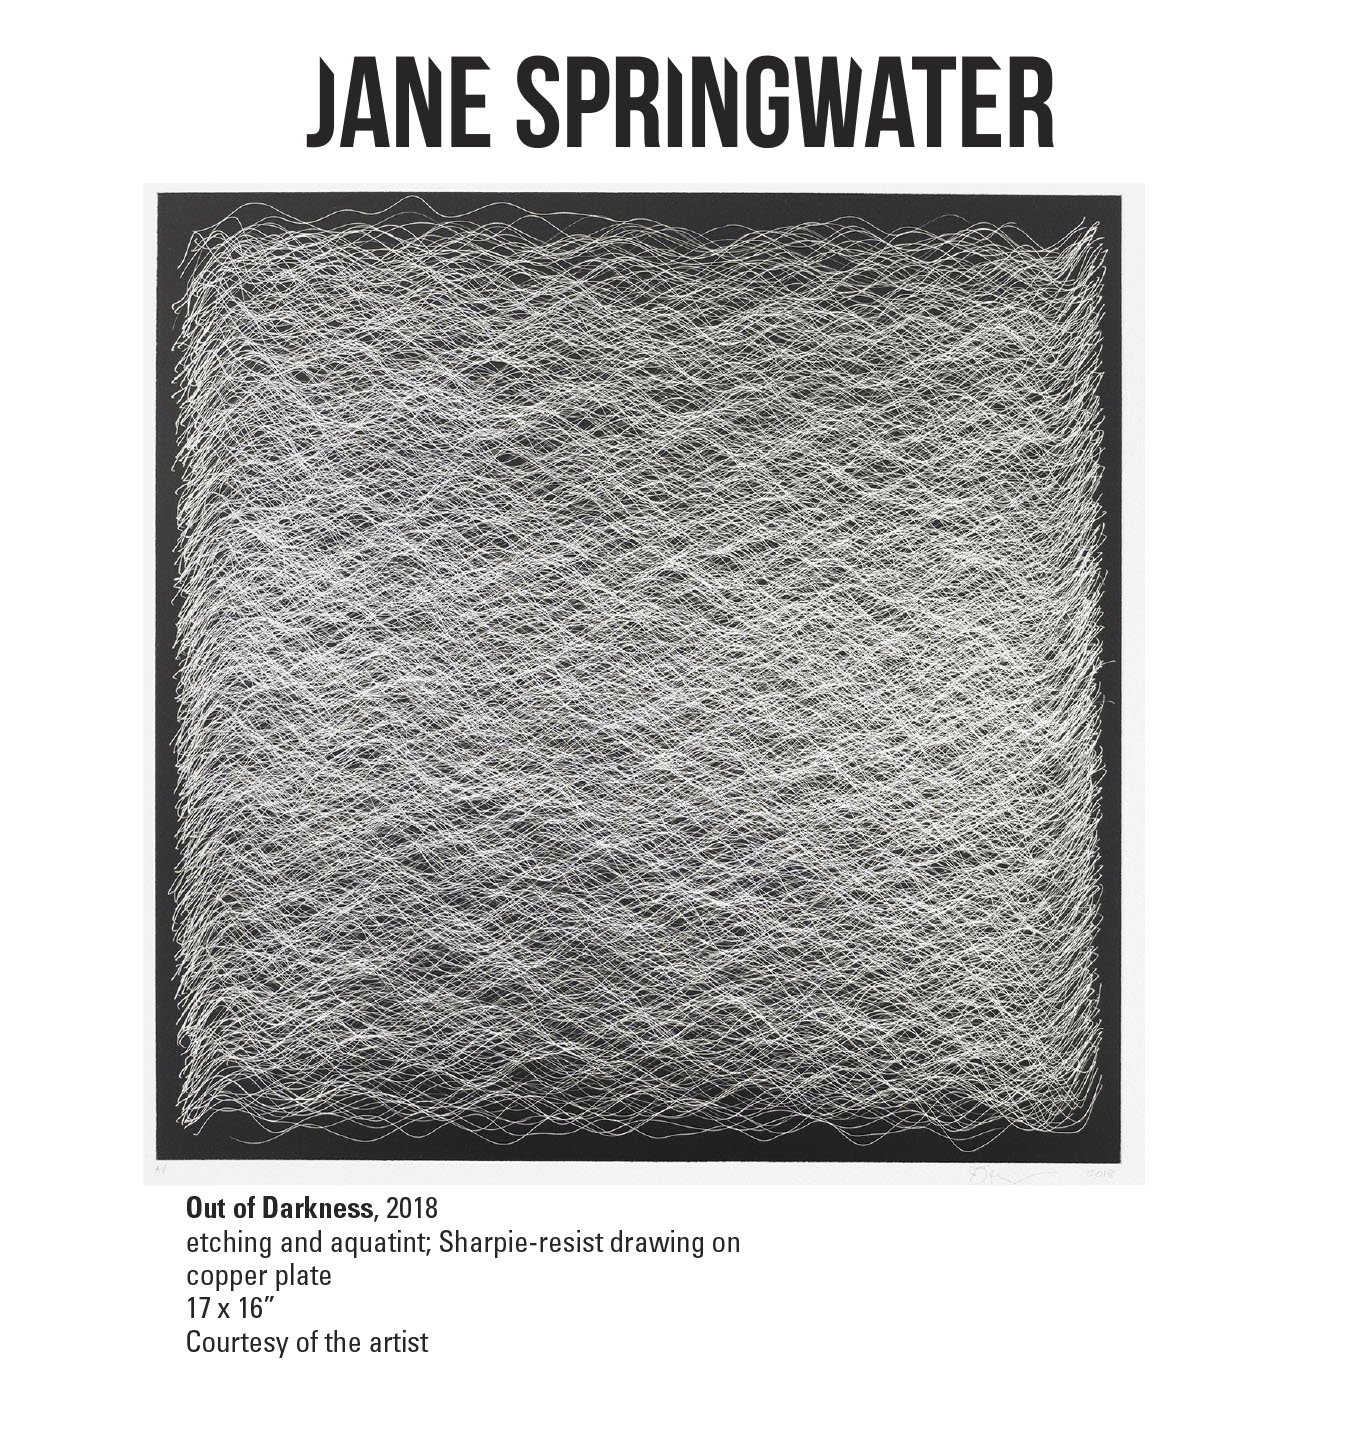 Jane Springwater, Out of Darkness, 2018. Etching and aquatint; Sharpie-resist drawing on copper plate. 17 x 16” Courtesy of the artist. A black and white etching of thin white lines overlapping each other creating a wave form texture.